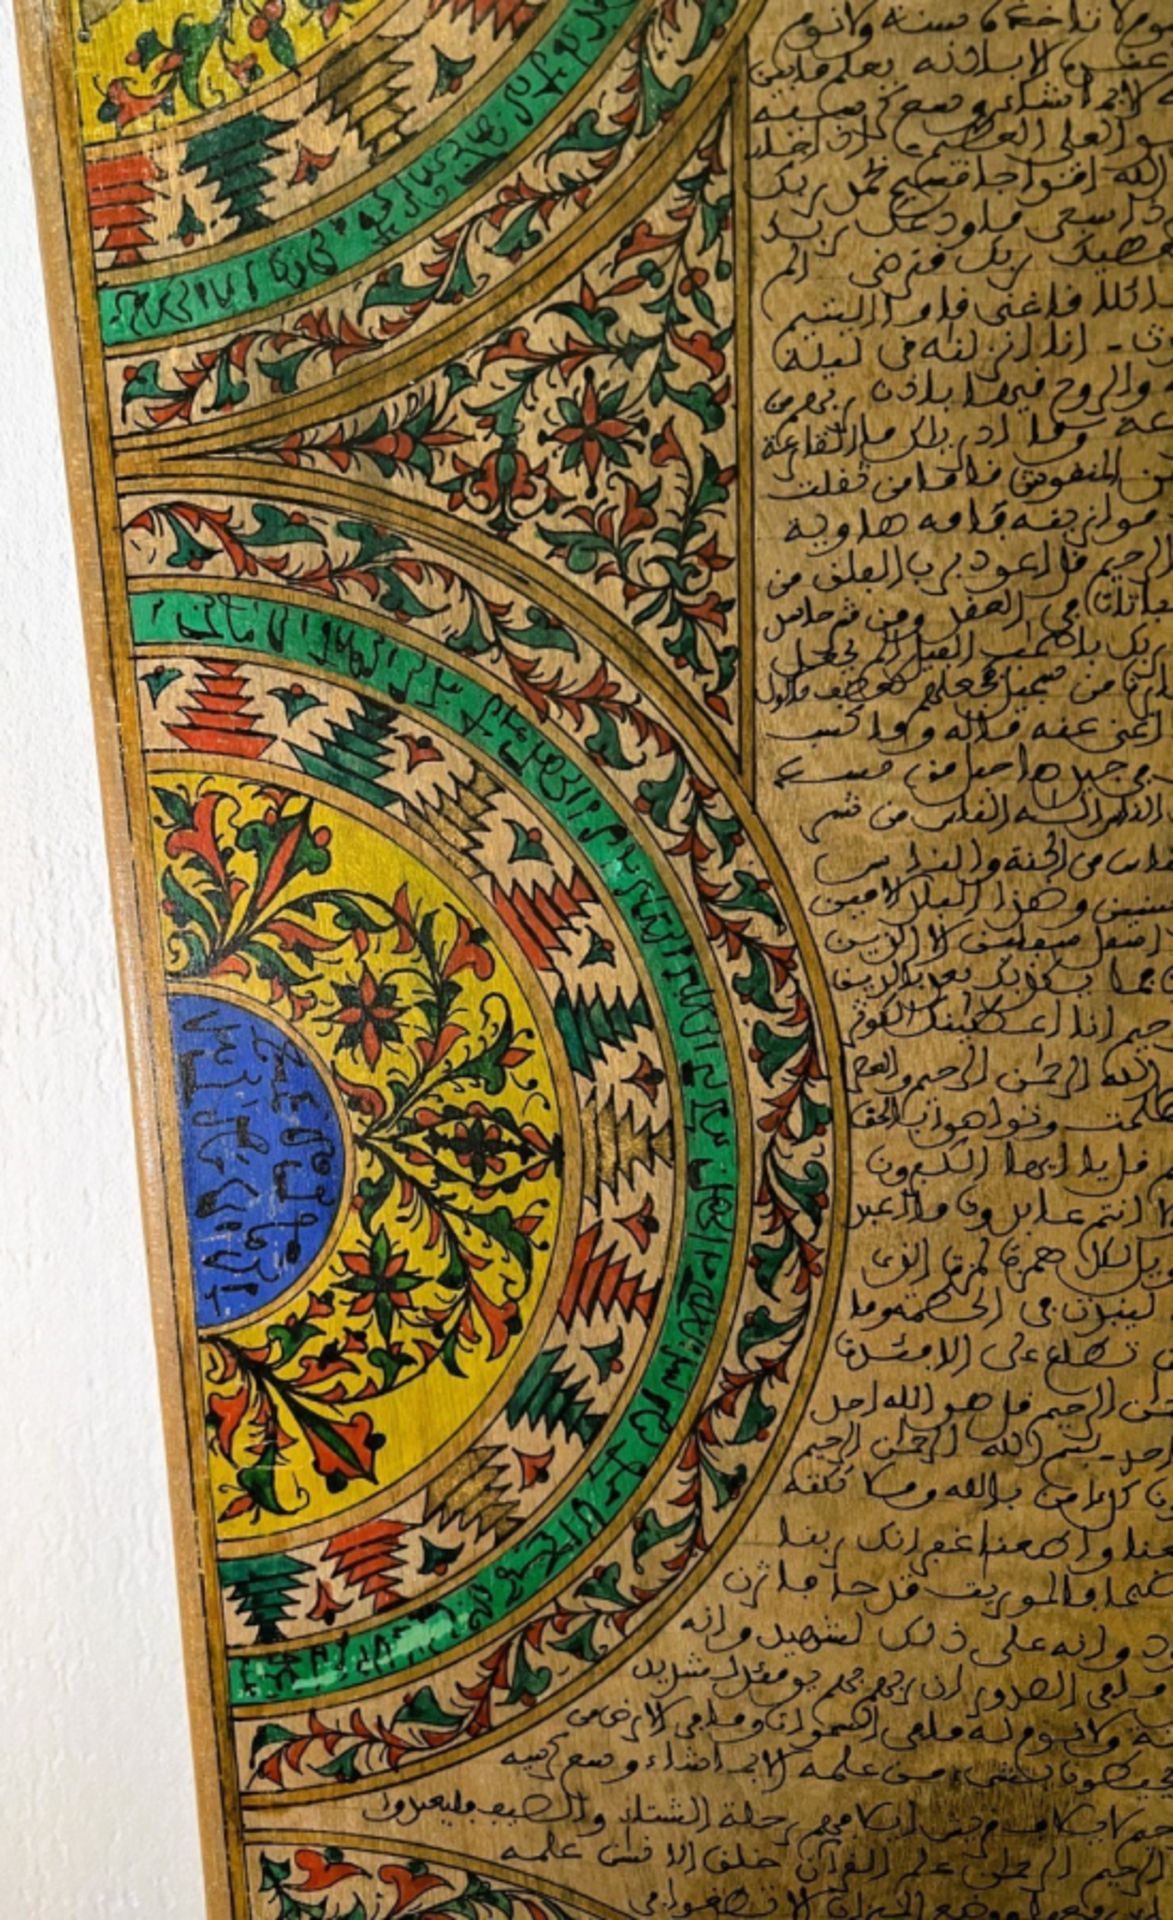 Illuminated calligraphy on wood with Quranic text - Image 3 of 4